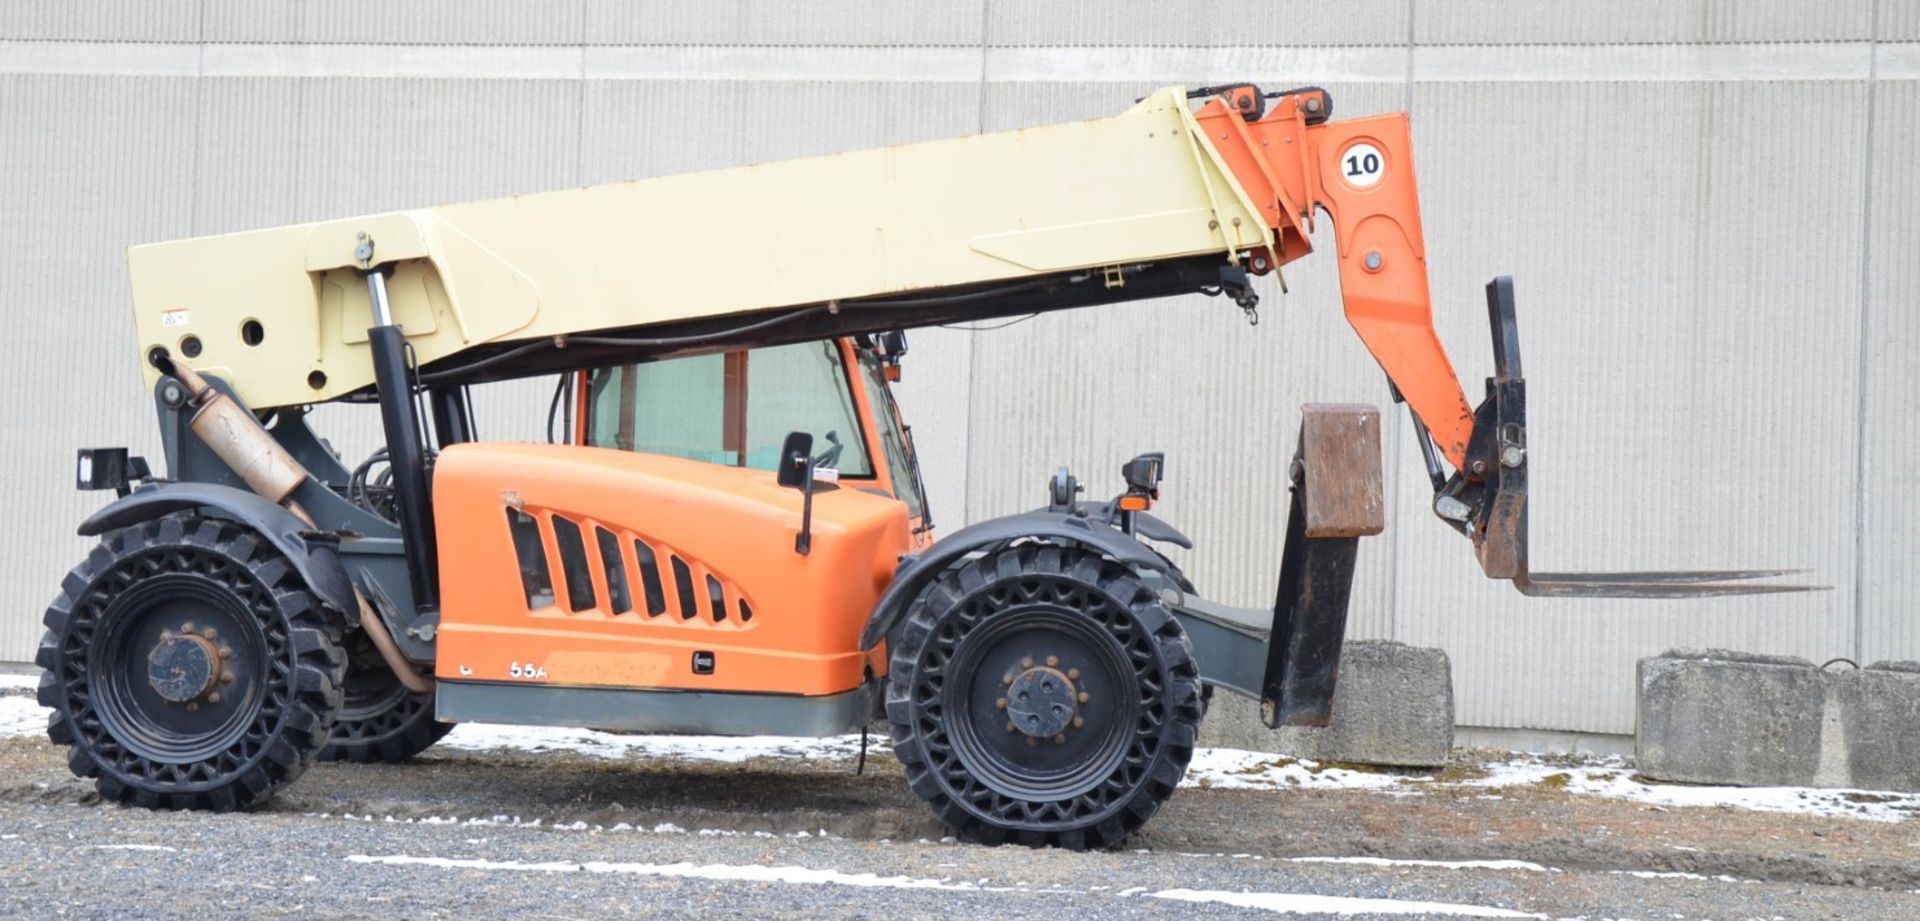 JLG (2011) G10-55A 10,000 LBS. CAPACITY DIESEL TELEHANDLER FORKLIFT WITH 56' MAX VERTICAL LIFT, - Image 20 of 23